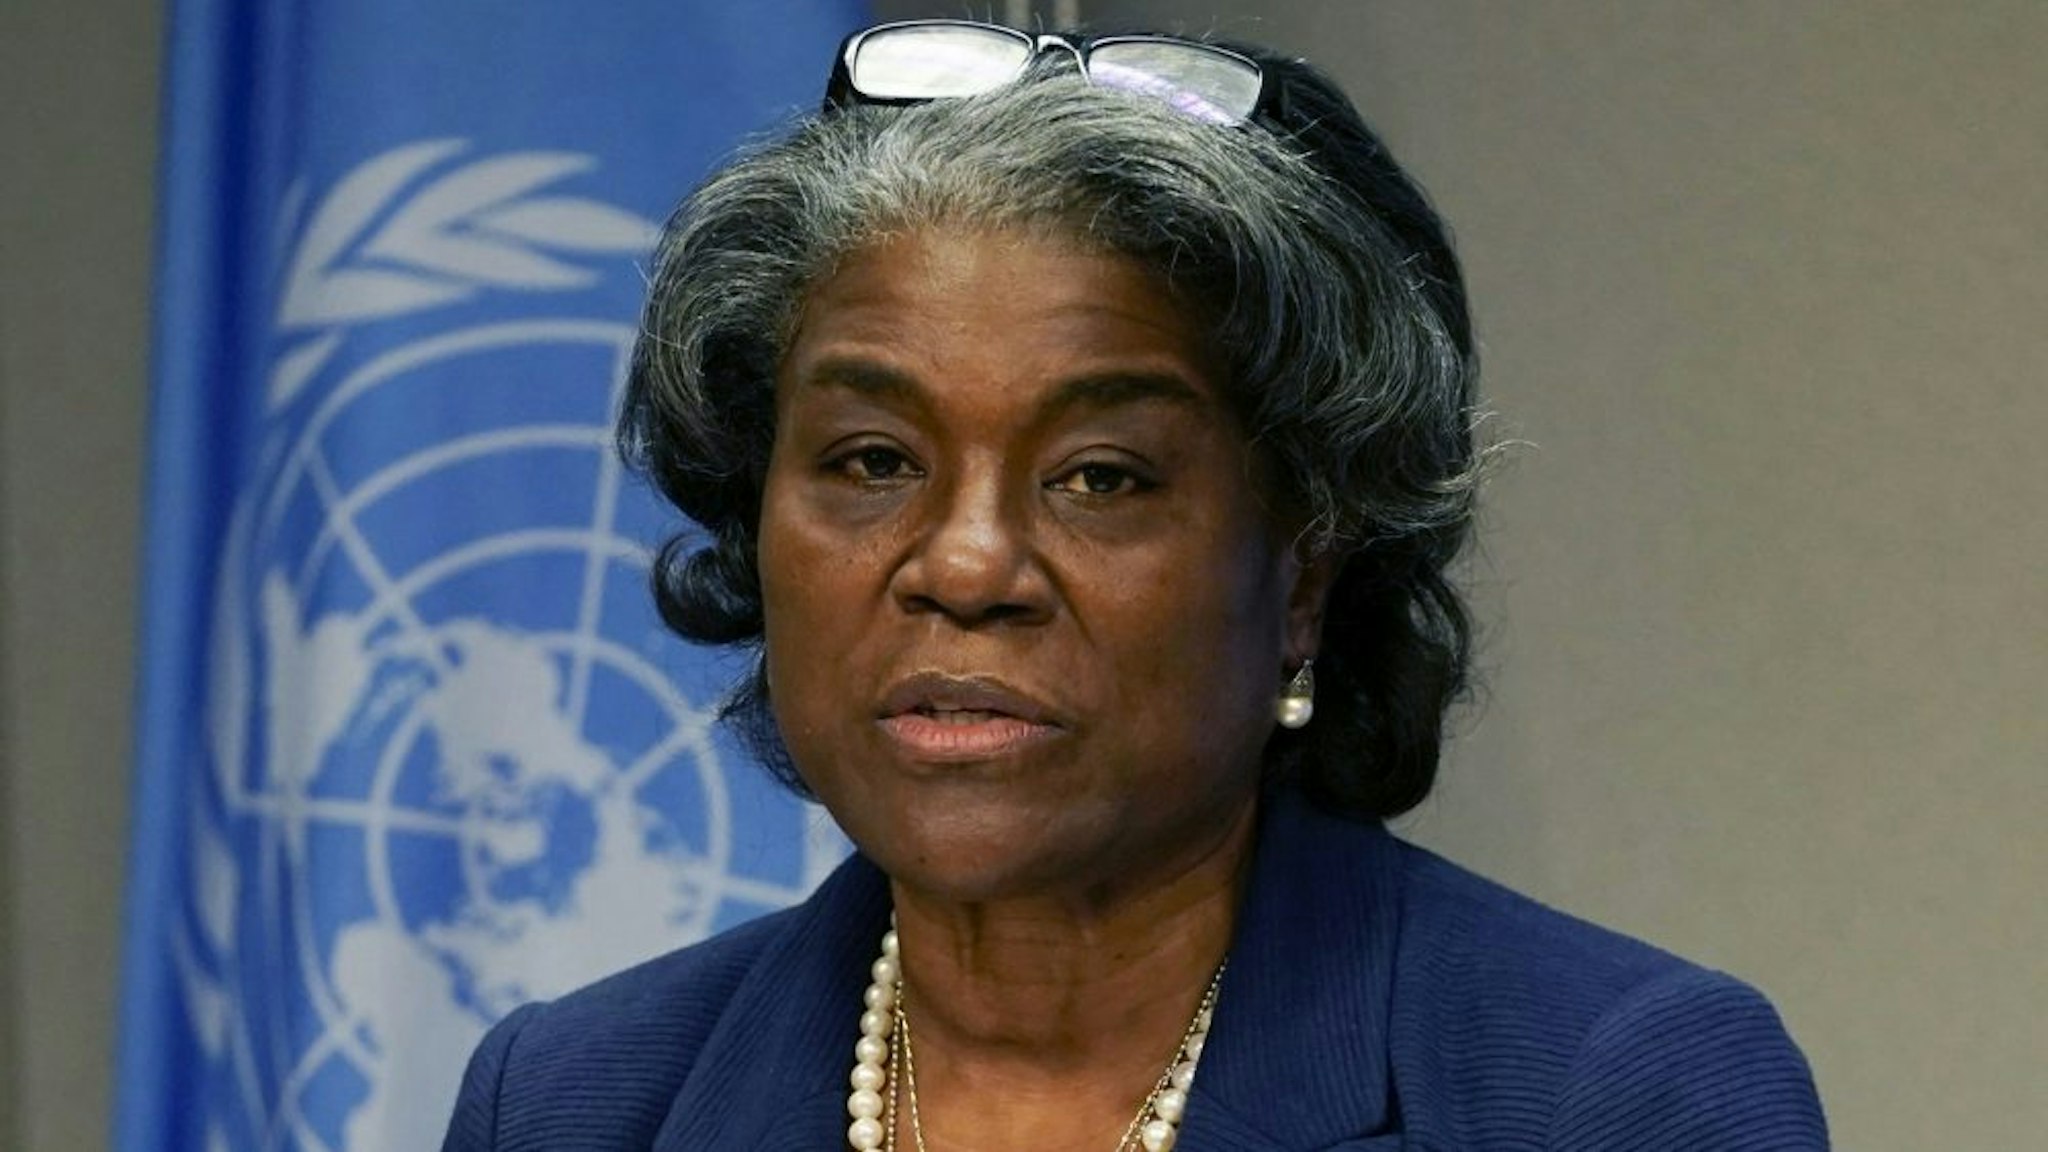 US ambassador to the United Nations, Linda Thomas-Greenfield, and President of the Security Council speaks during a press conference for the Security Council programme of work in March at the UN Headquarters in New York on March 1, 2021.